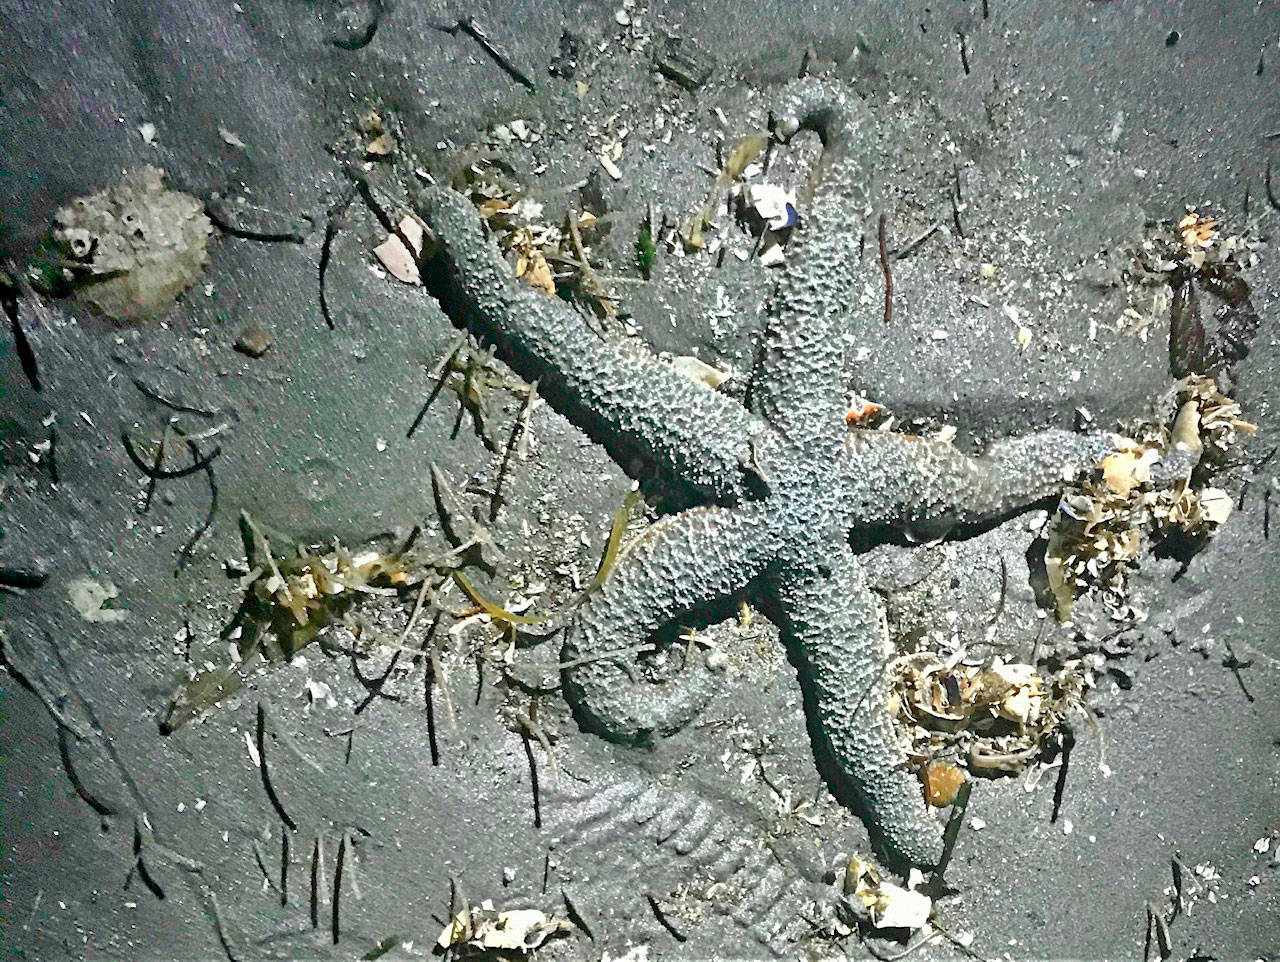 A mottled sea star on the shore of the north end on Vashon last week (Bianca Perla Photo).